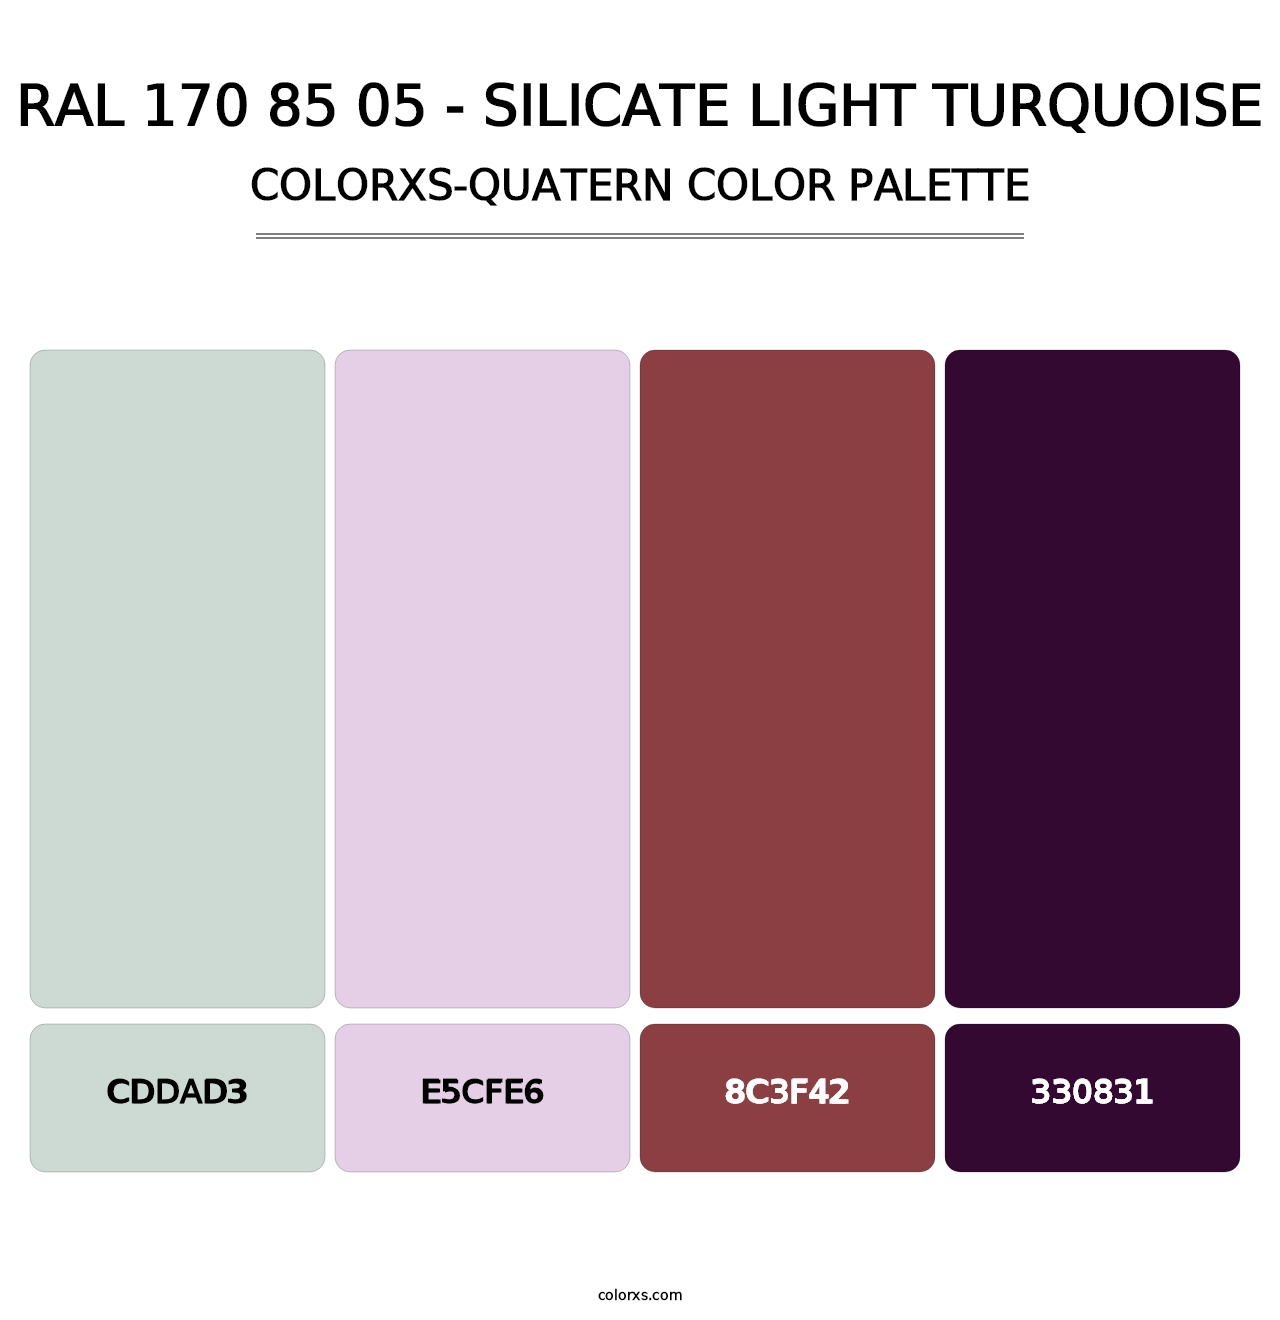 RAL 170 85 05 - Silicate Light Turquoise - Colorxs Quatern Palette